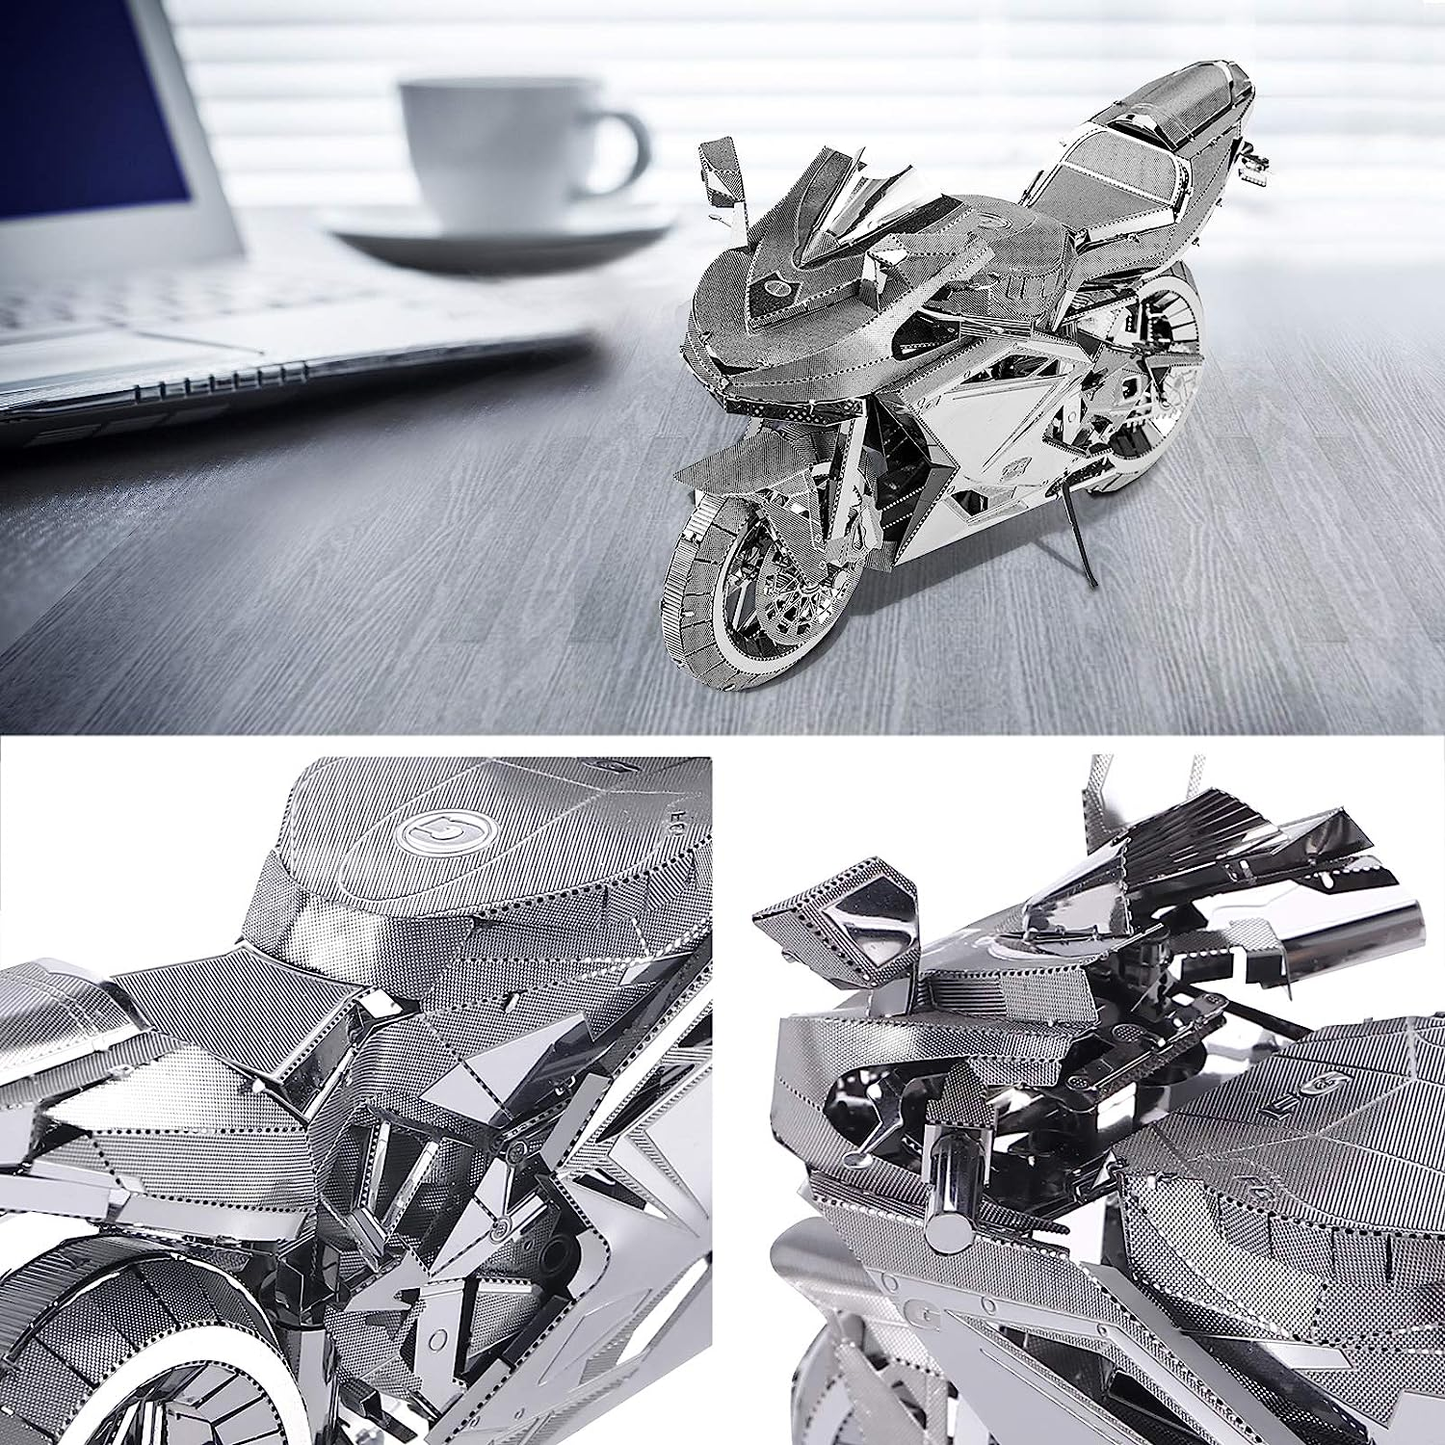 Piececool 3D Metal Puzzles for Adults, DIY 3D Motorcycle Model Kits, Great Birthday Gifts, 72 Pcs